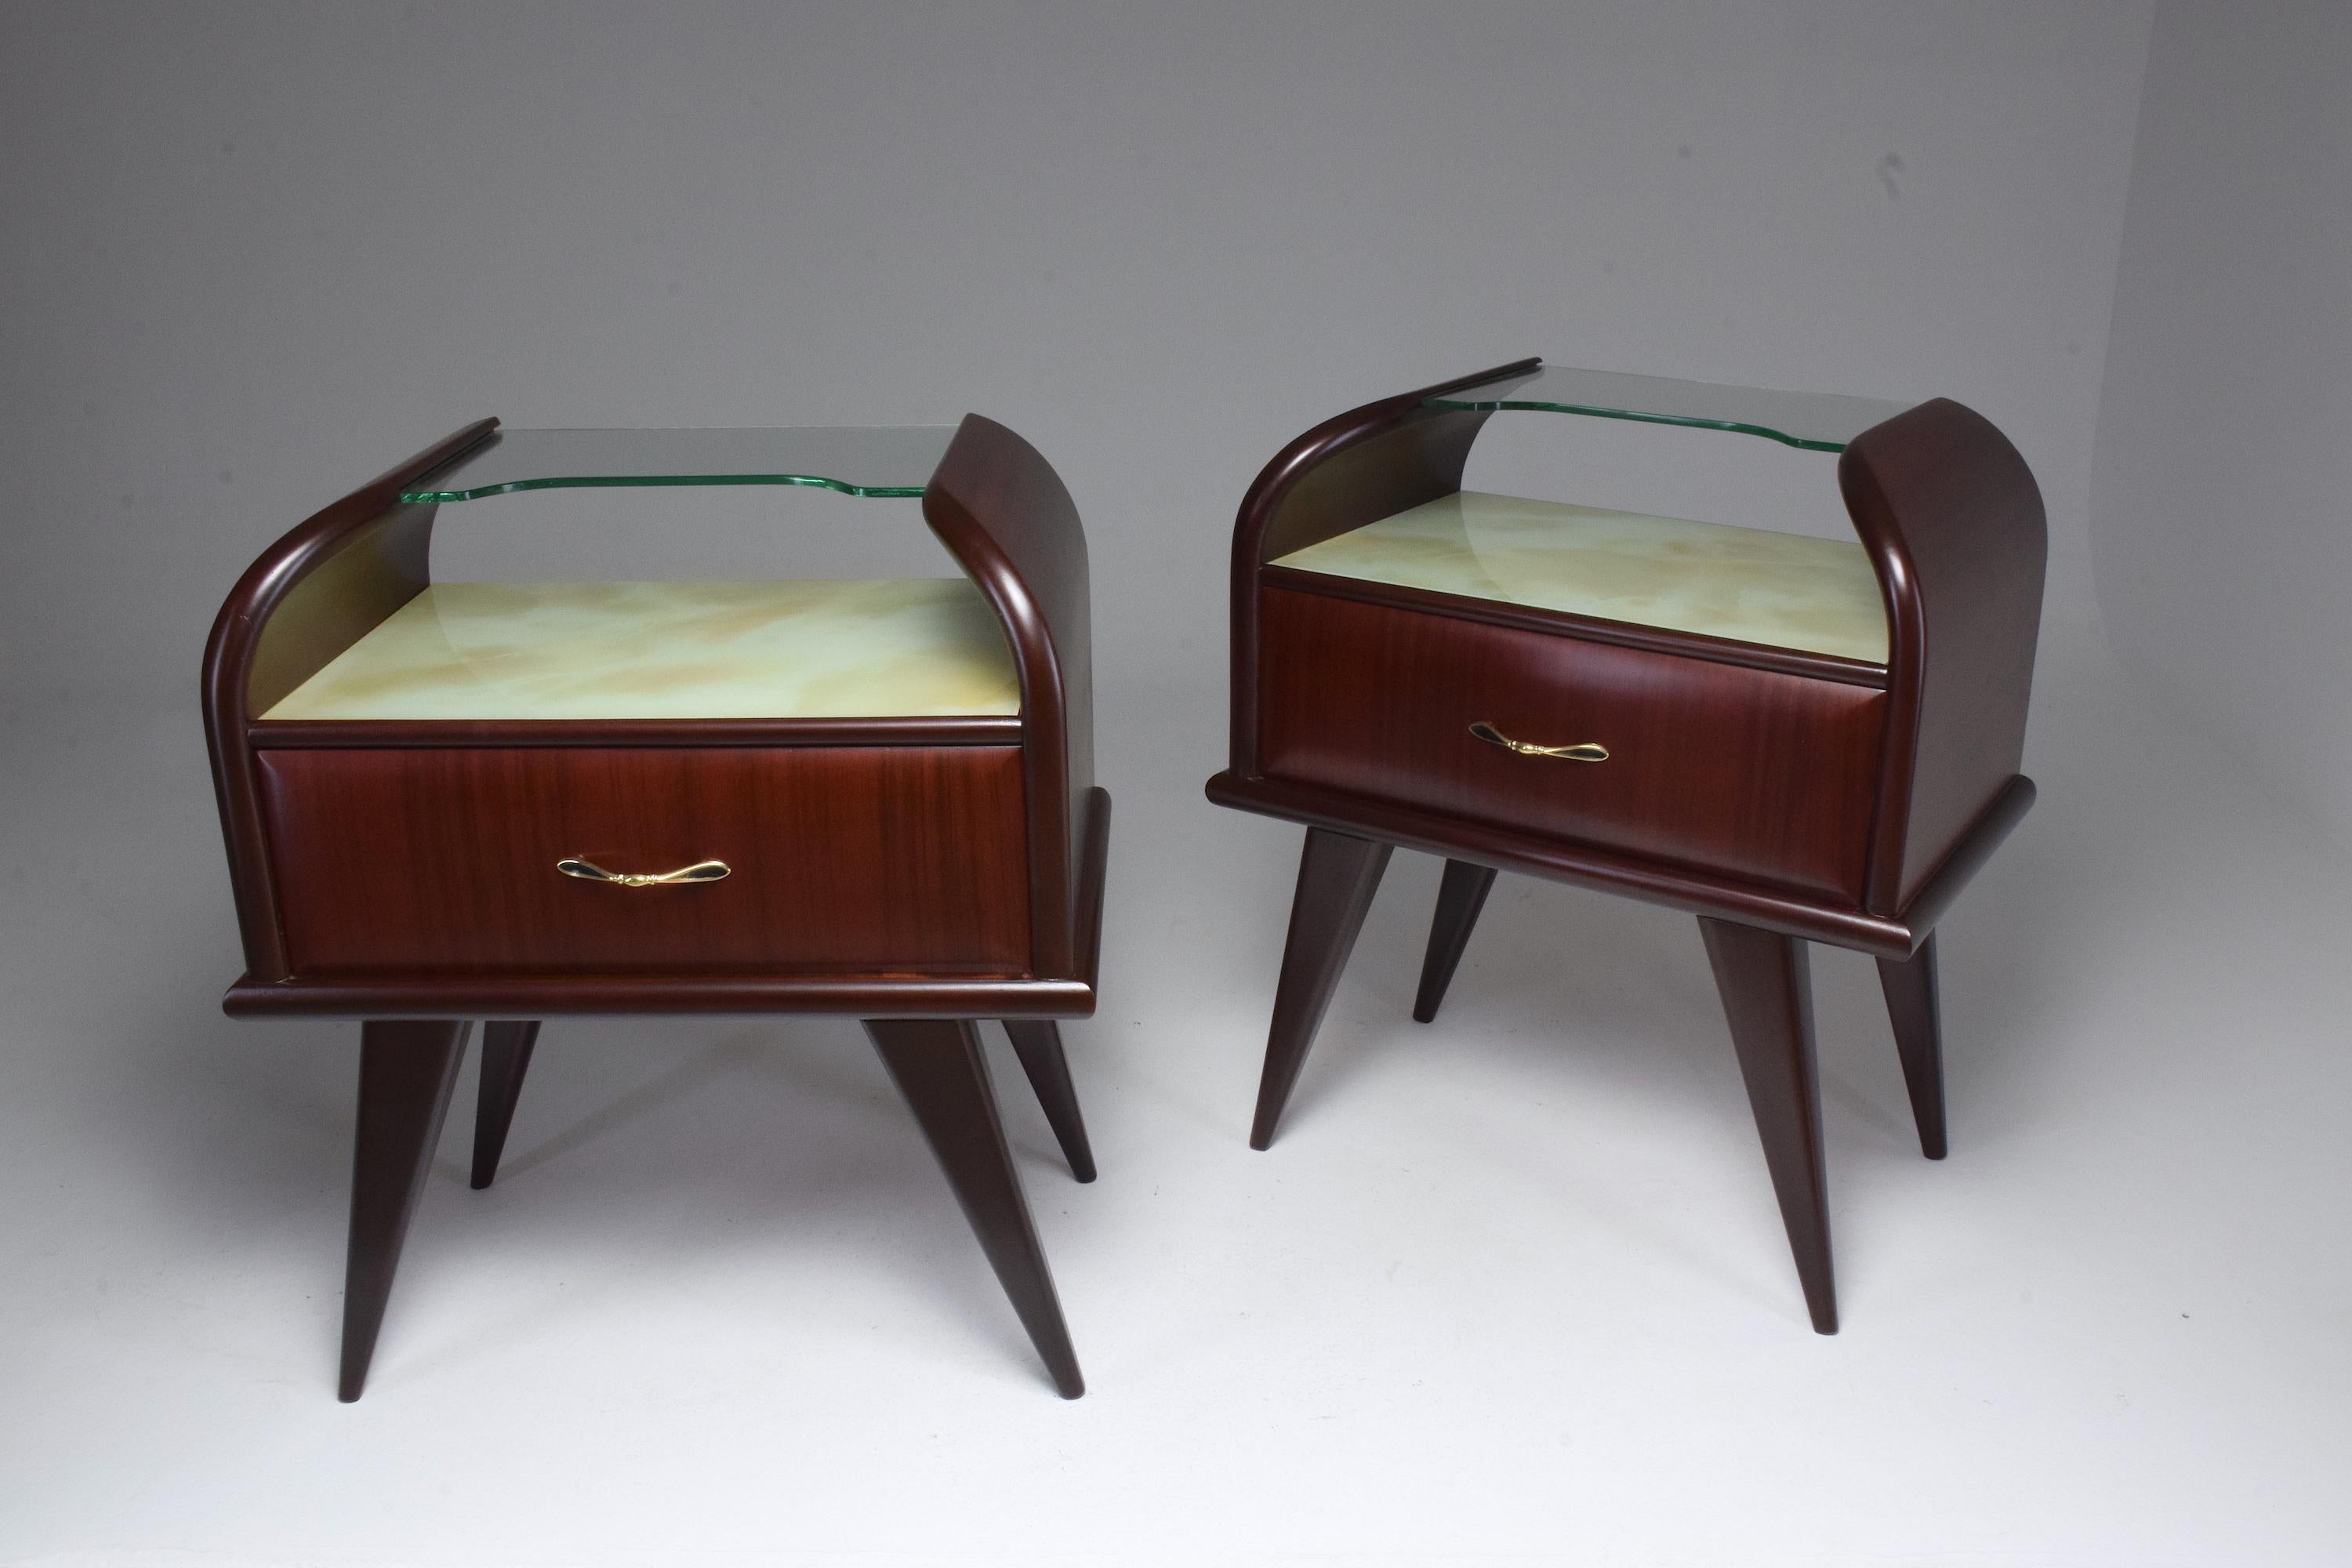 A pair of Italian midcentury nightstands or bedside table in mahogany designed with two glass shelf units, a central drawer with a sophisticated gold polished brass handle and splayed tapered legs typical of the Italian design period. The main shelf